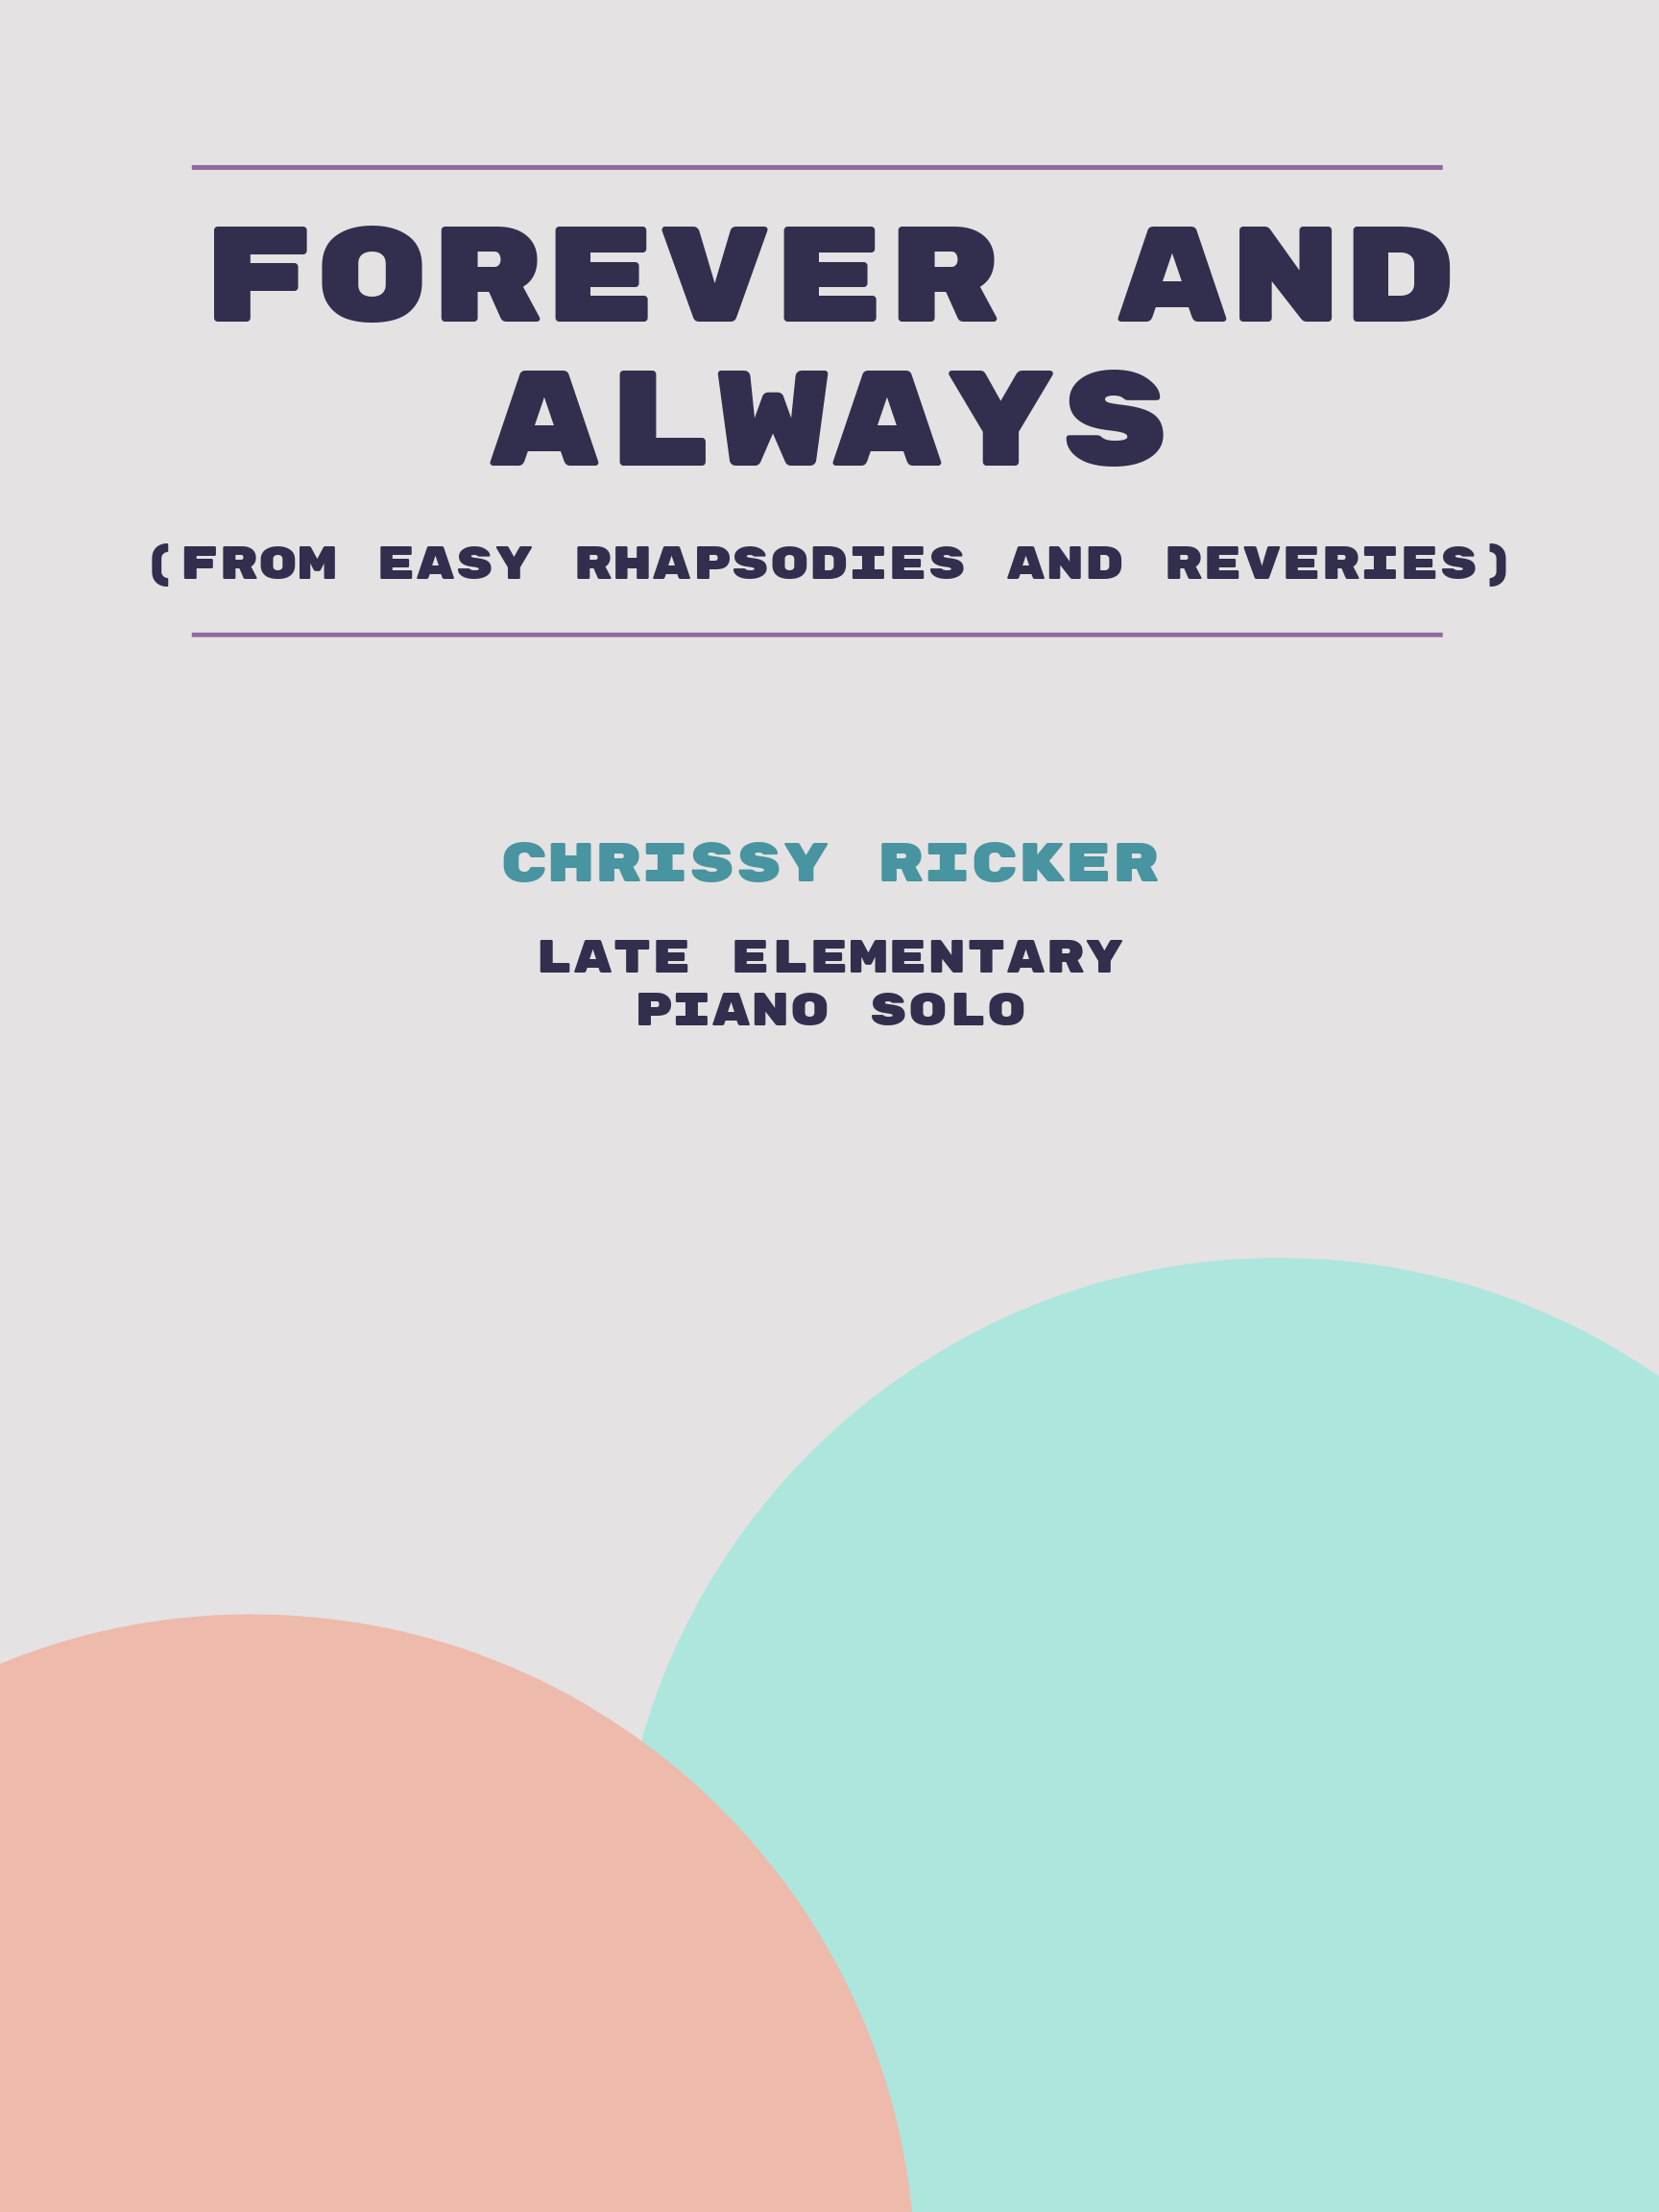 Forever and Always by Chrissy Ricker